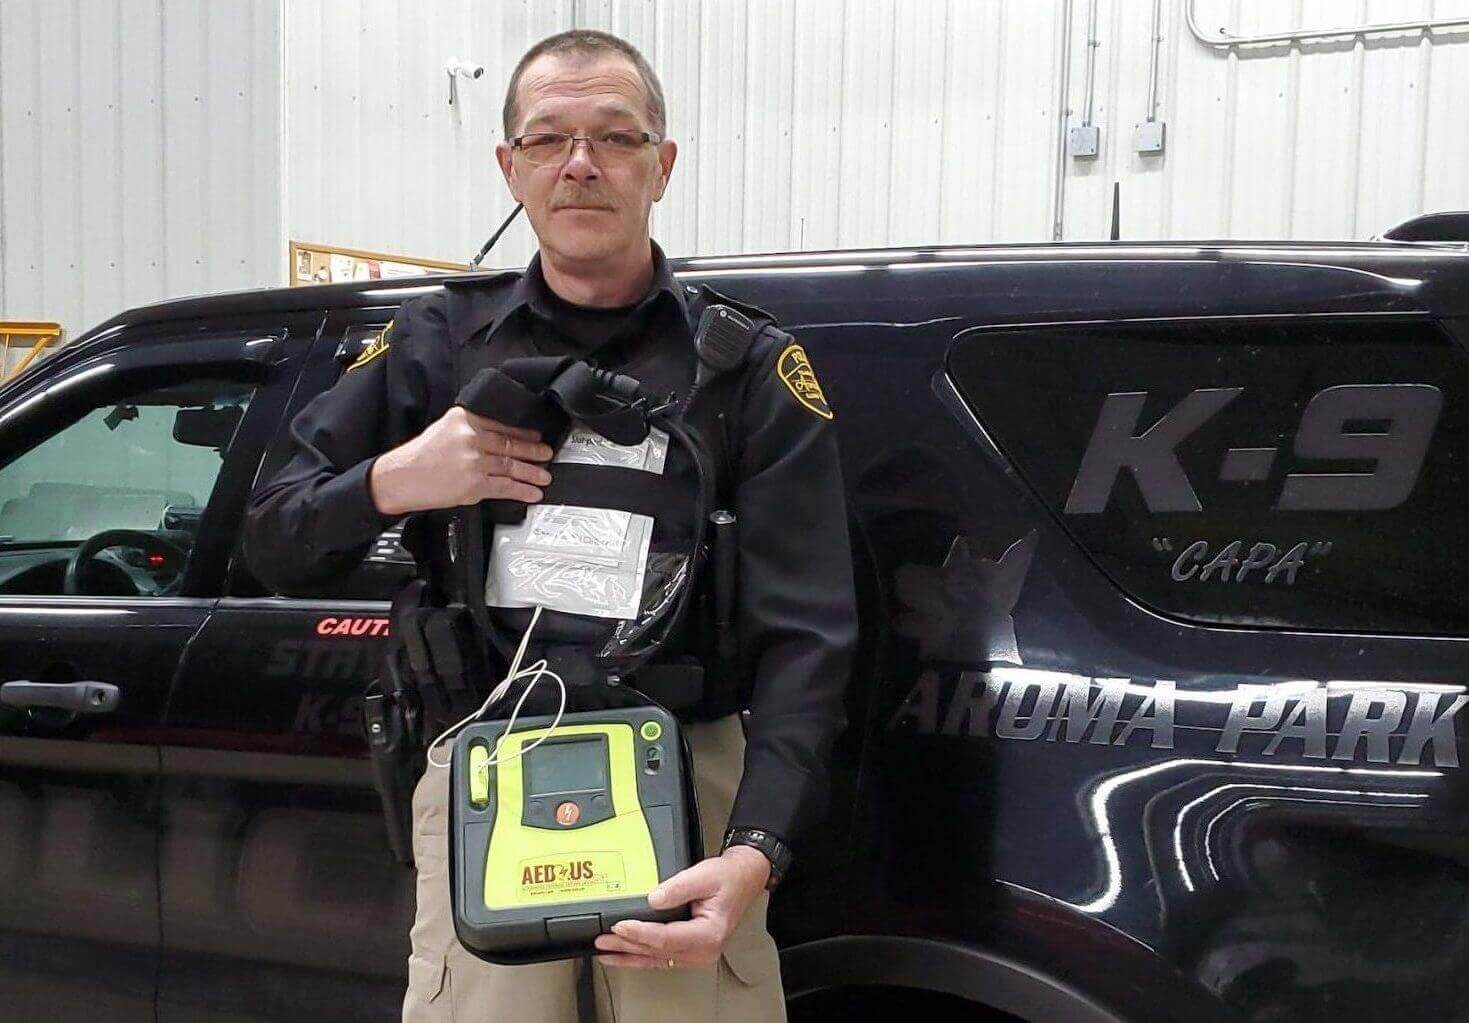 Todd Navratil of Aroma Park Police Department, AED.us giveaway winners